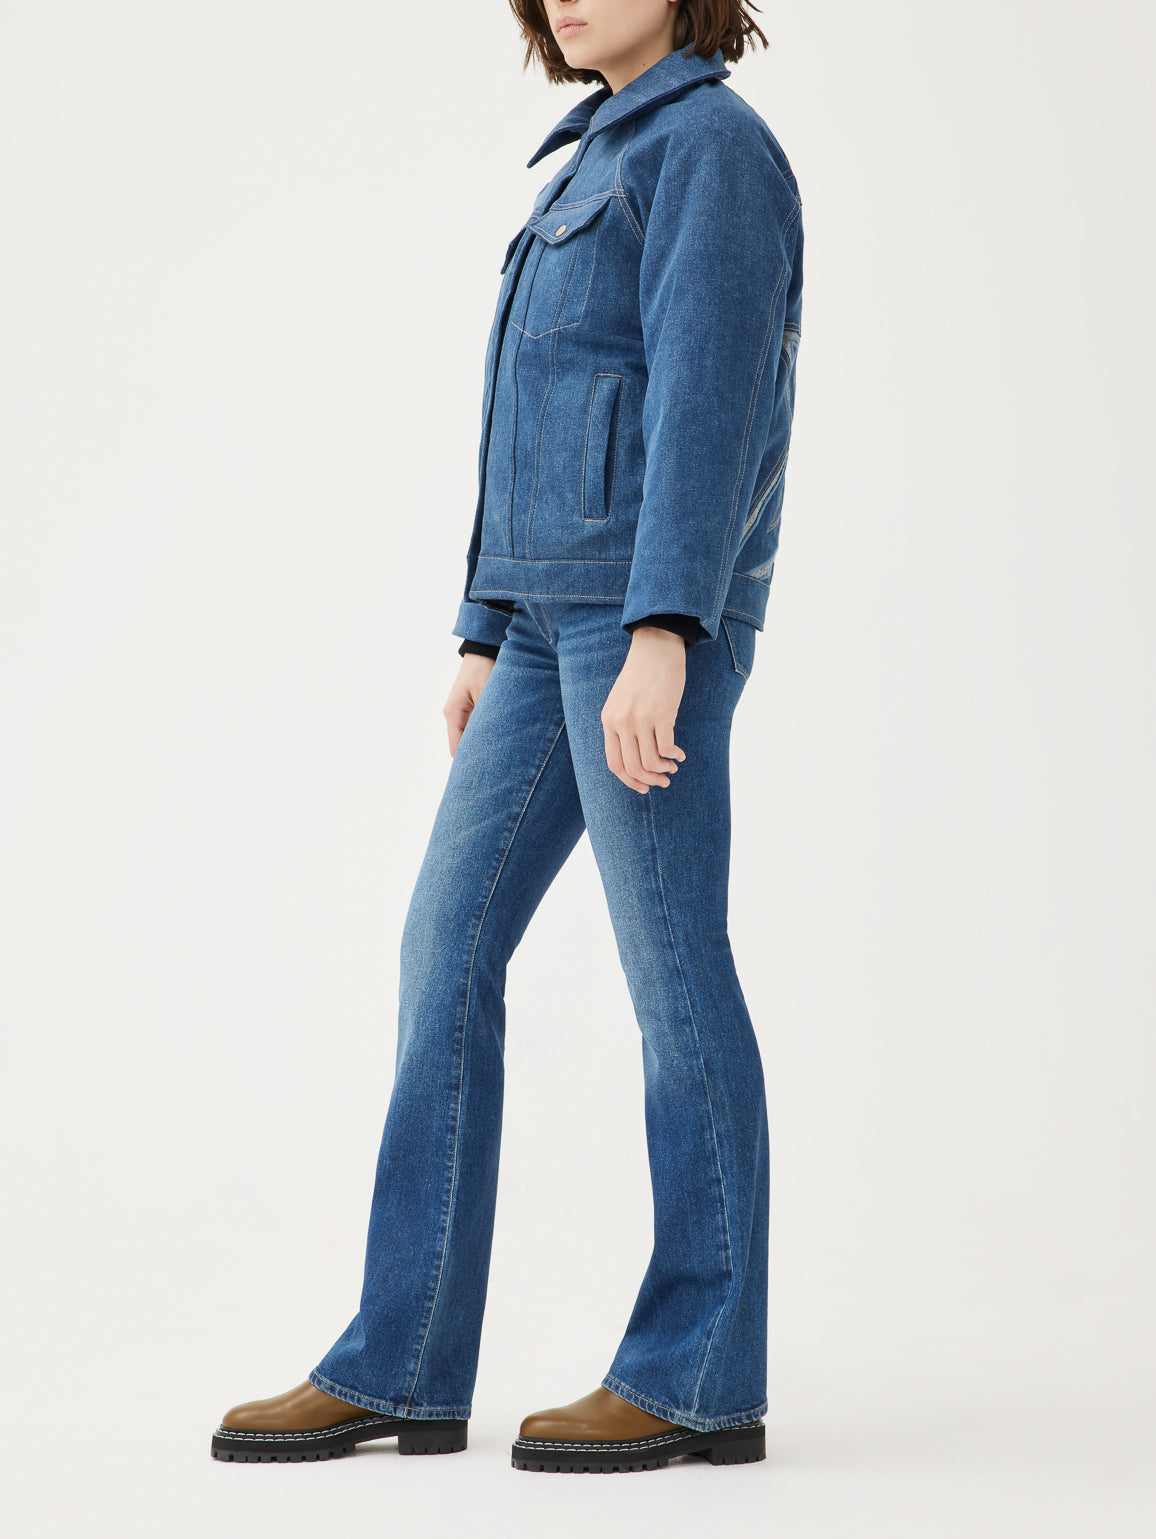 Perfect Moment and Denim Sustainable Ski 2022 Collection DL1961 Outfits — Denim Skiwear Launch